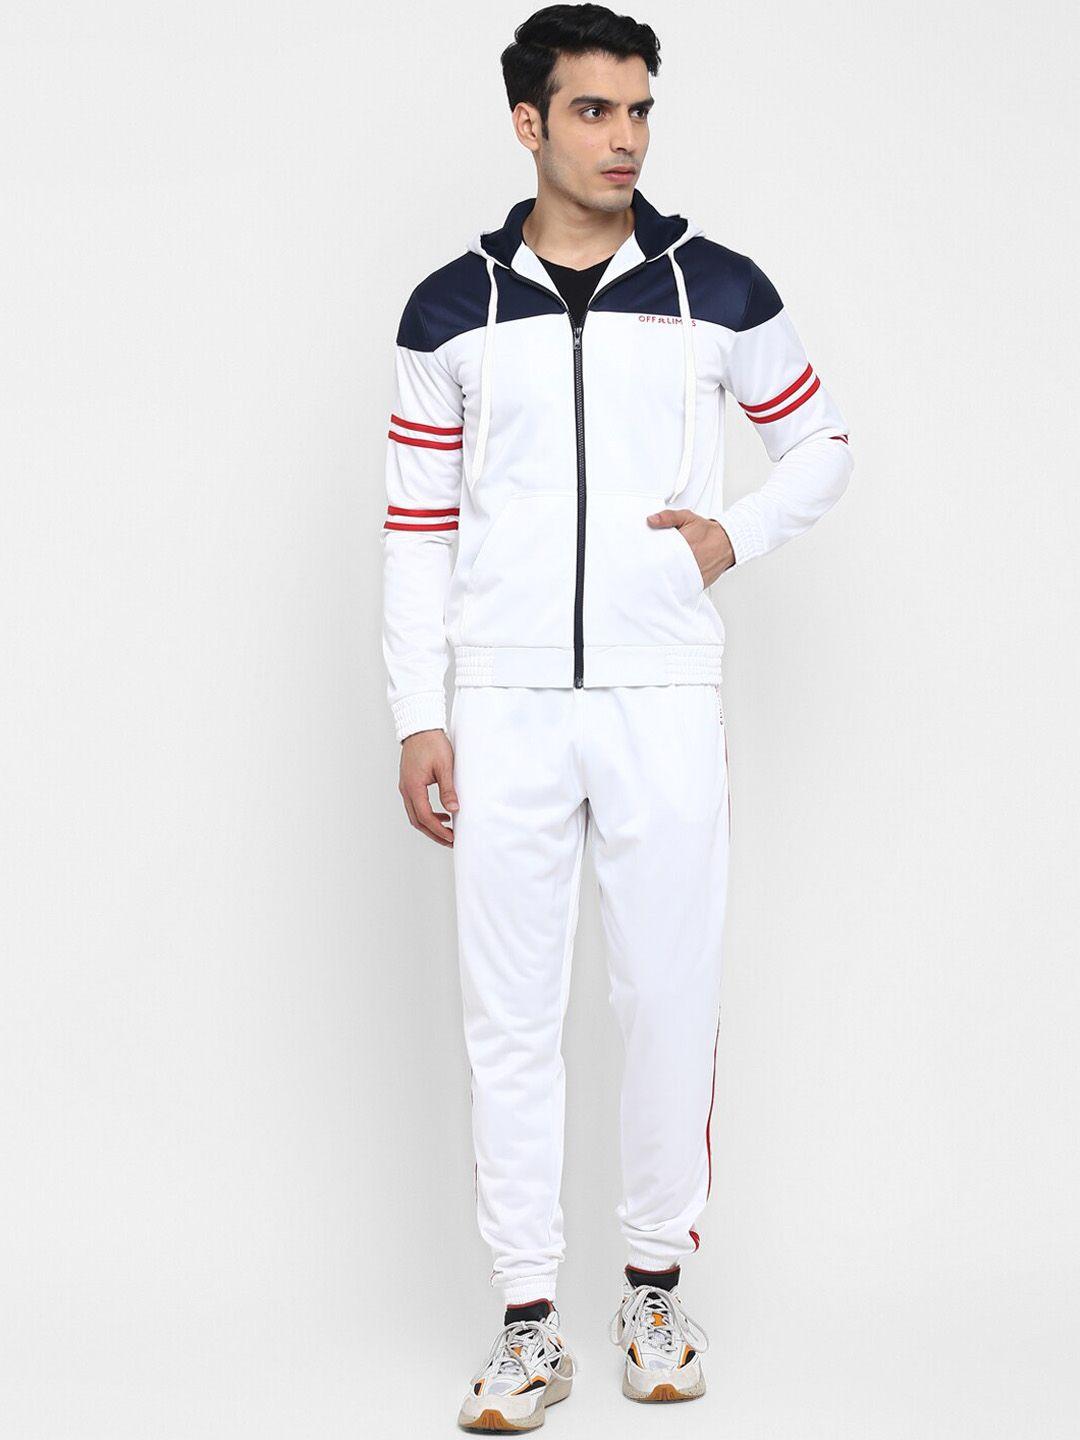 off limits men white & red colourblocked tracksuit